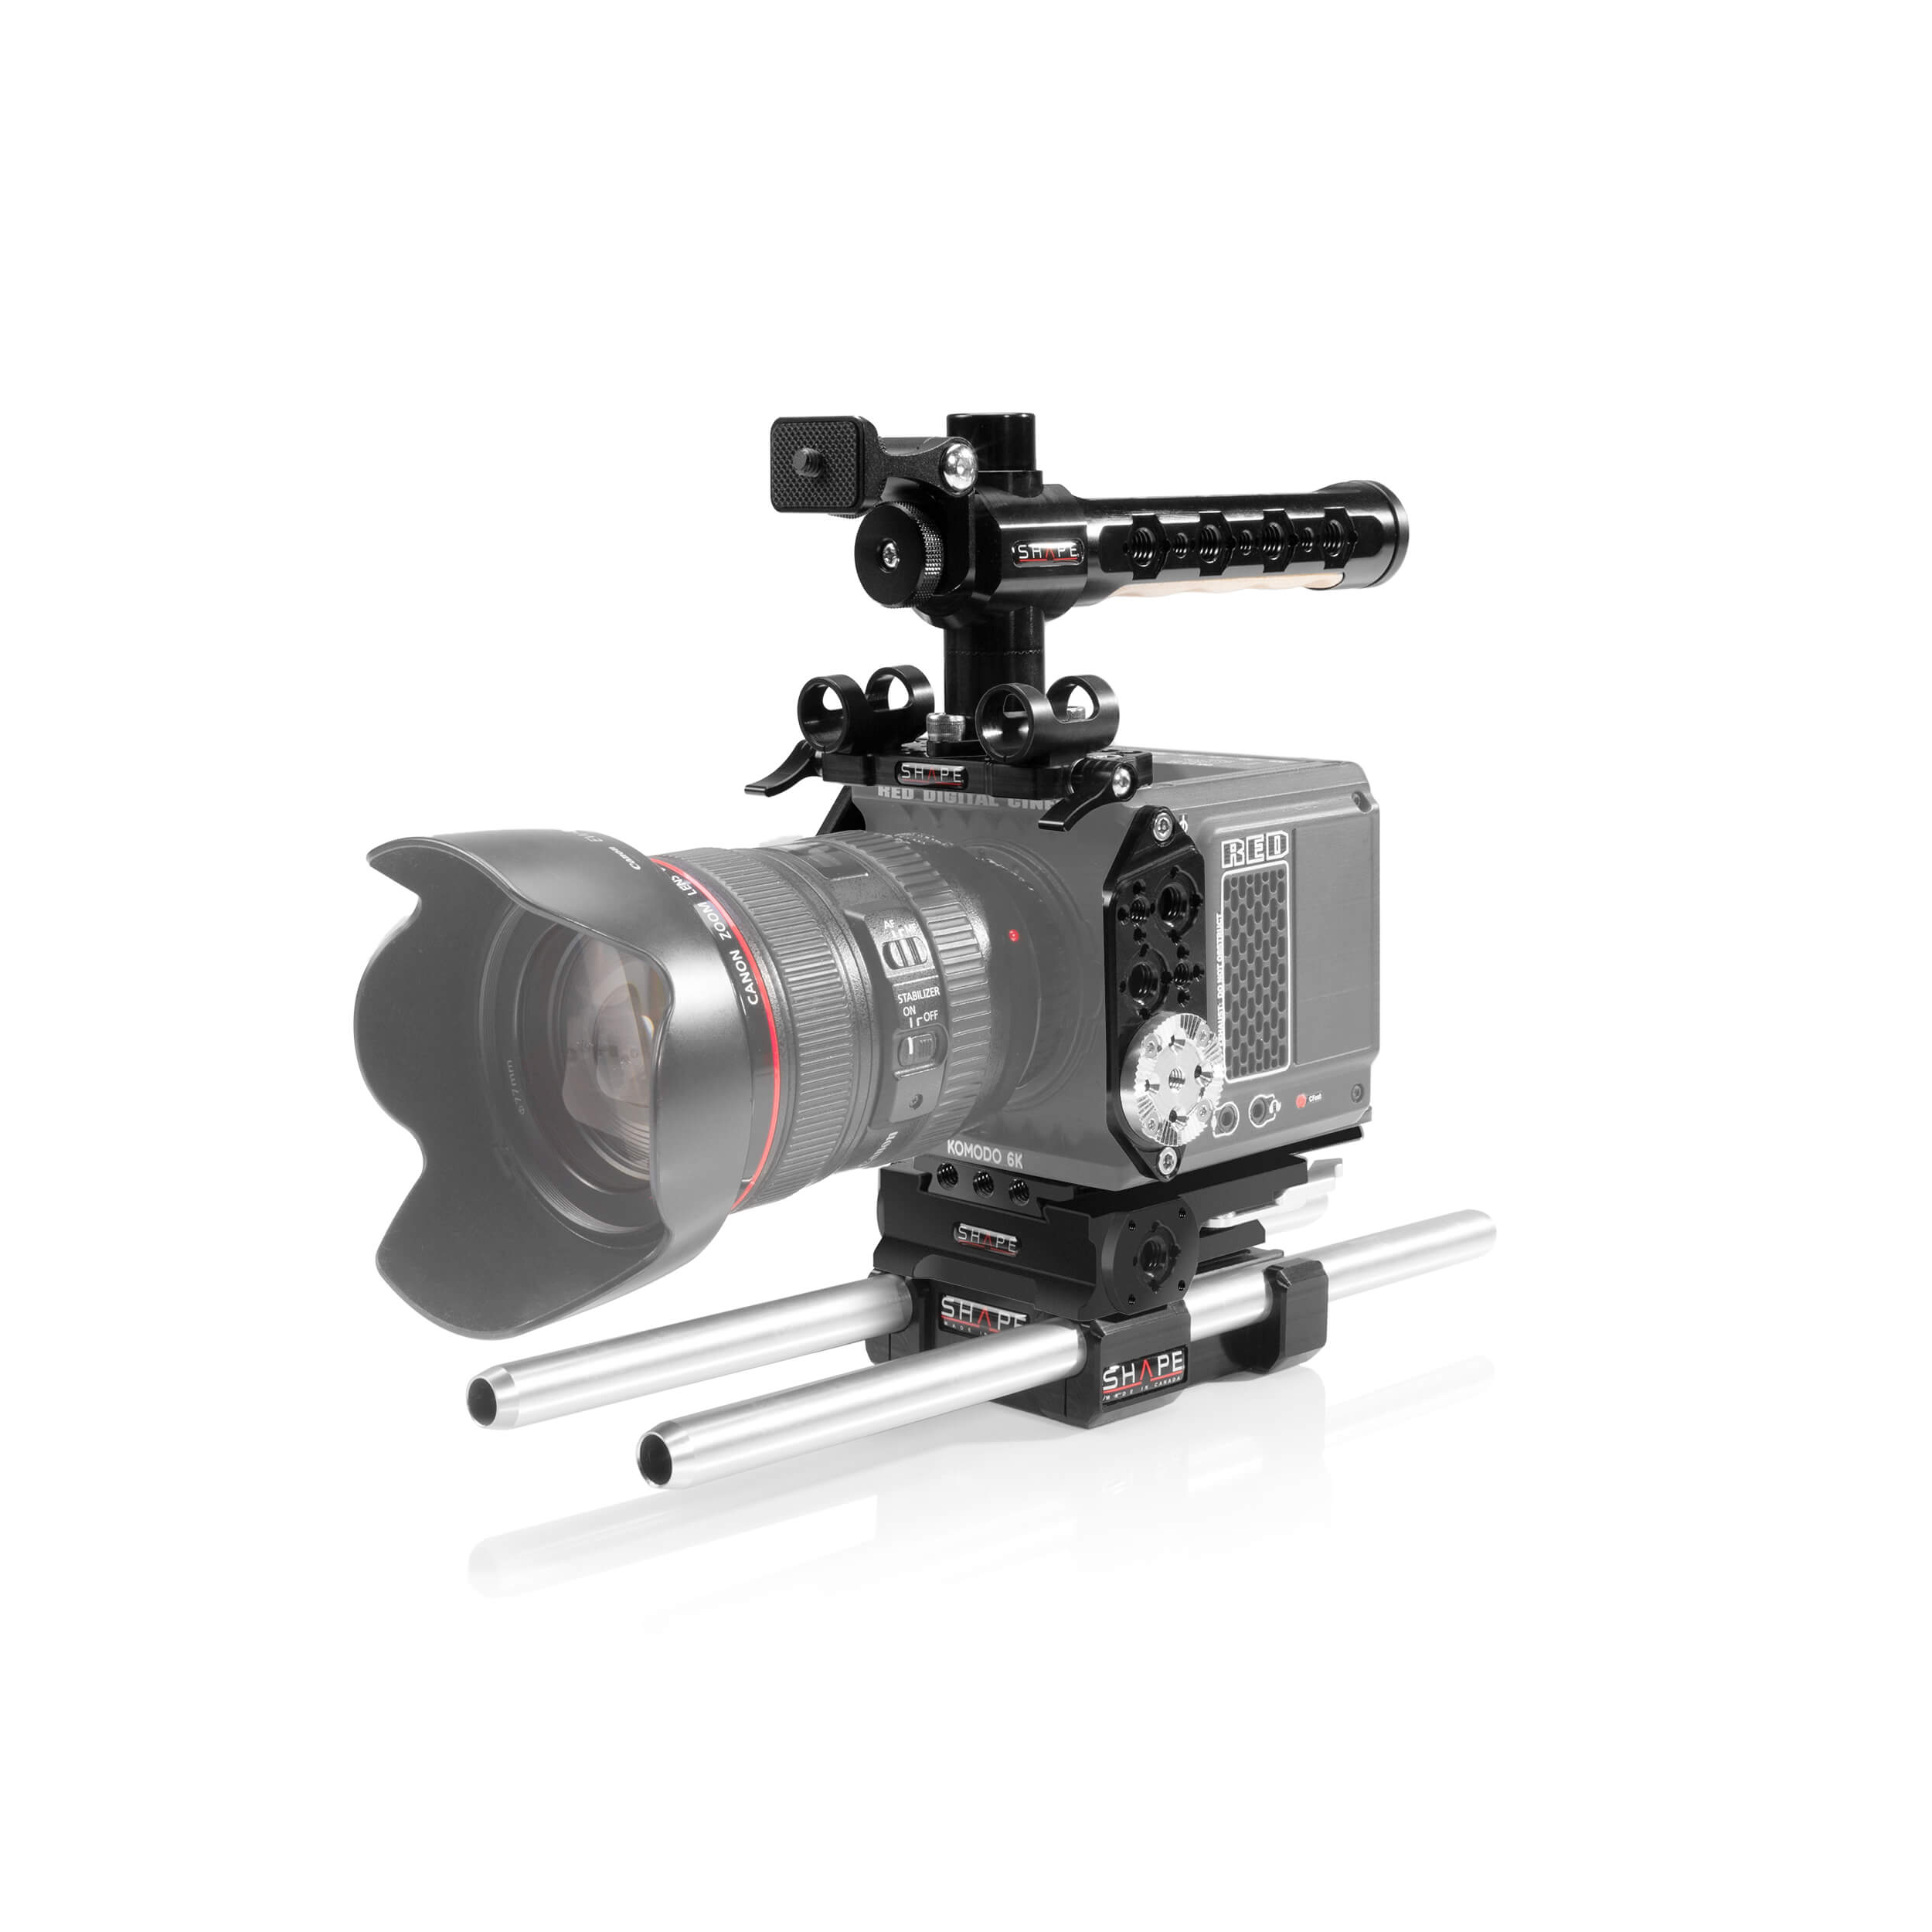 SHAPE Full Camera Cage with 15mm LW Rod System for RED KOMODO